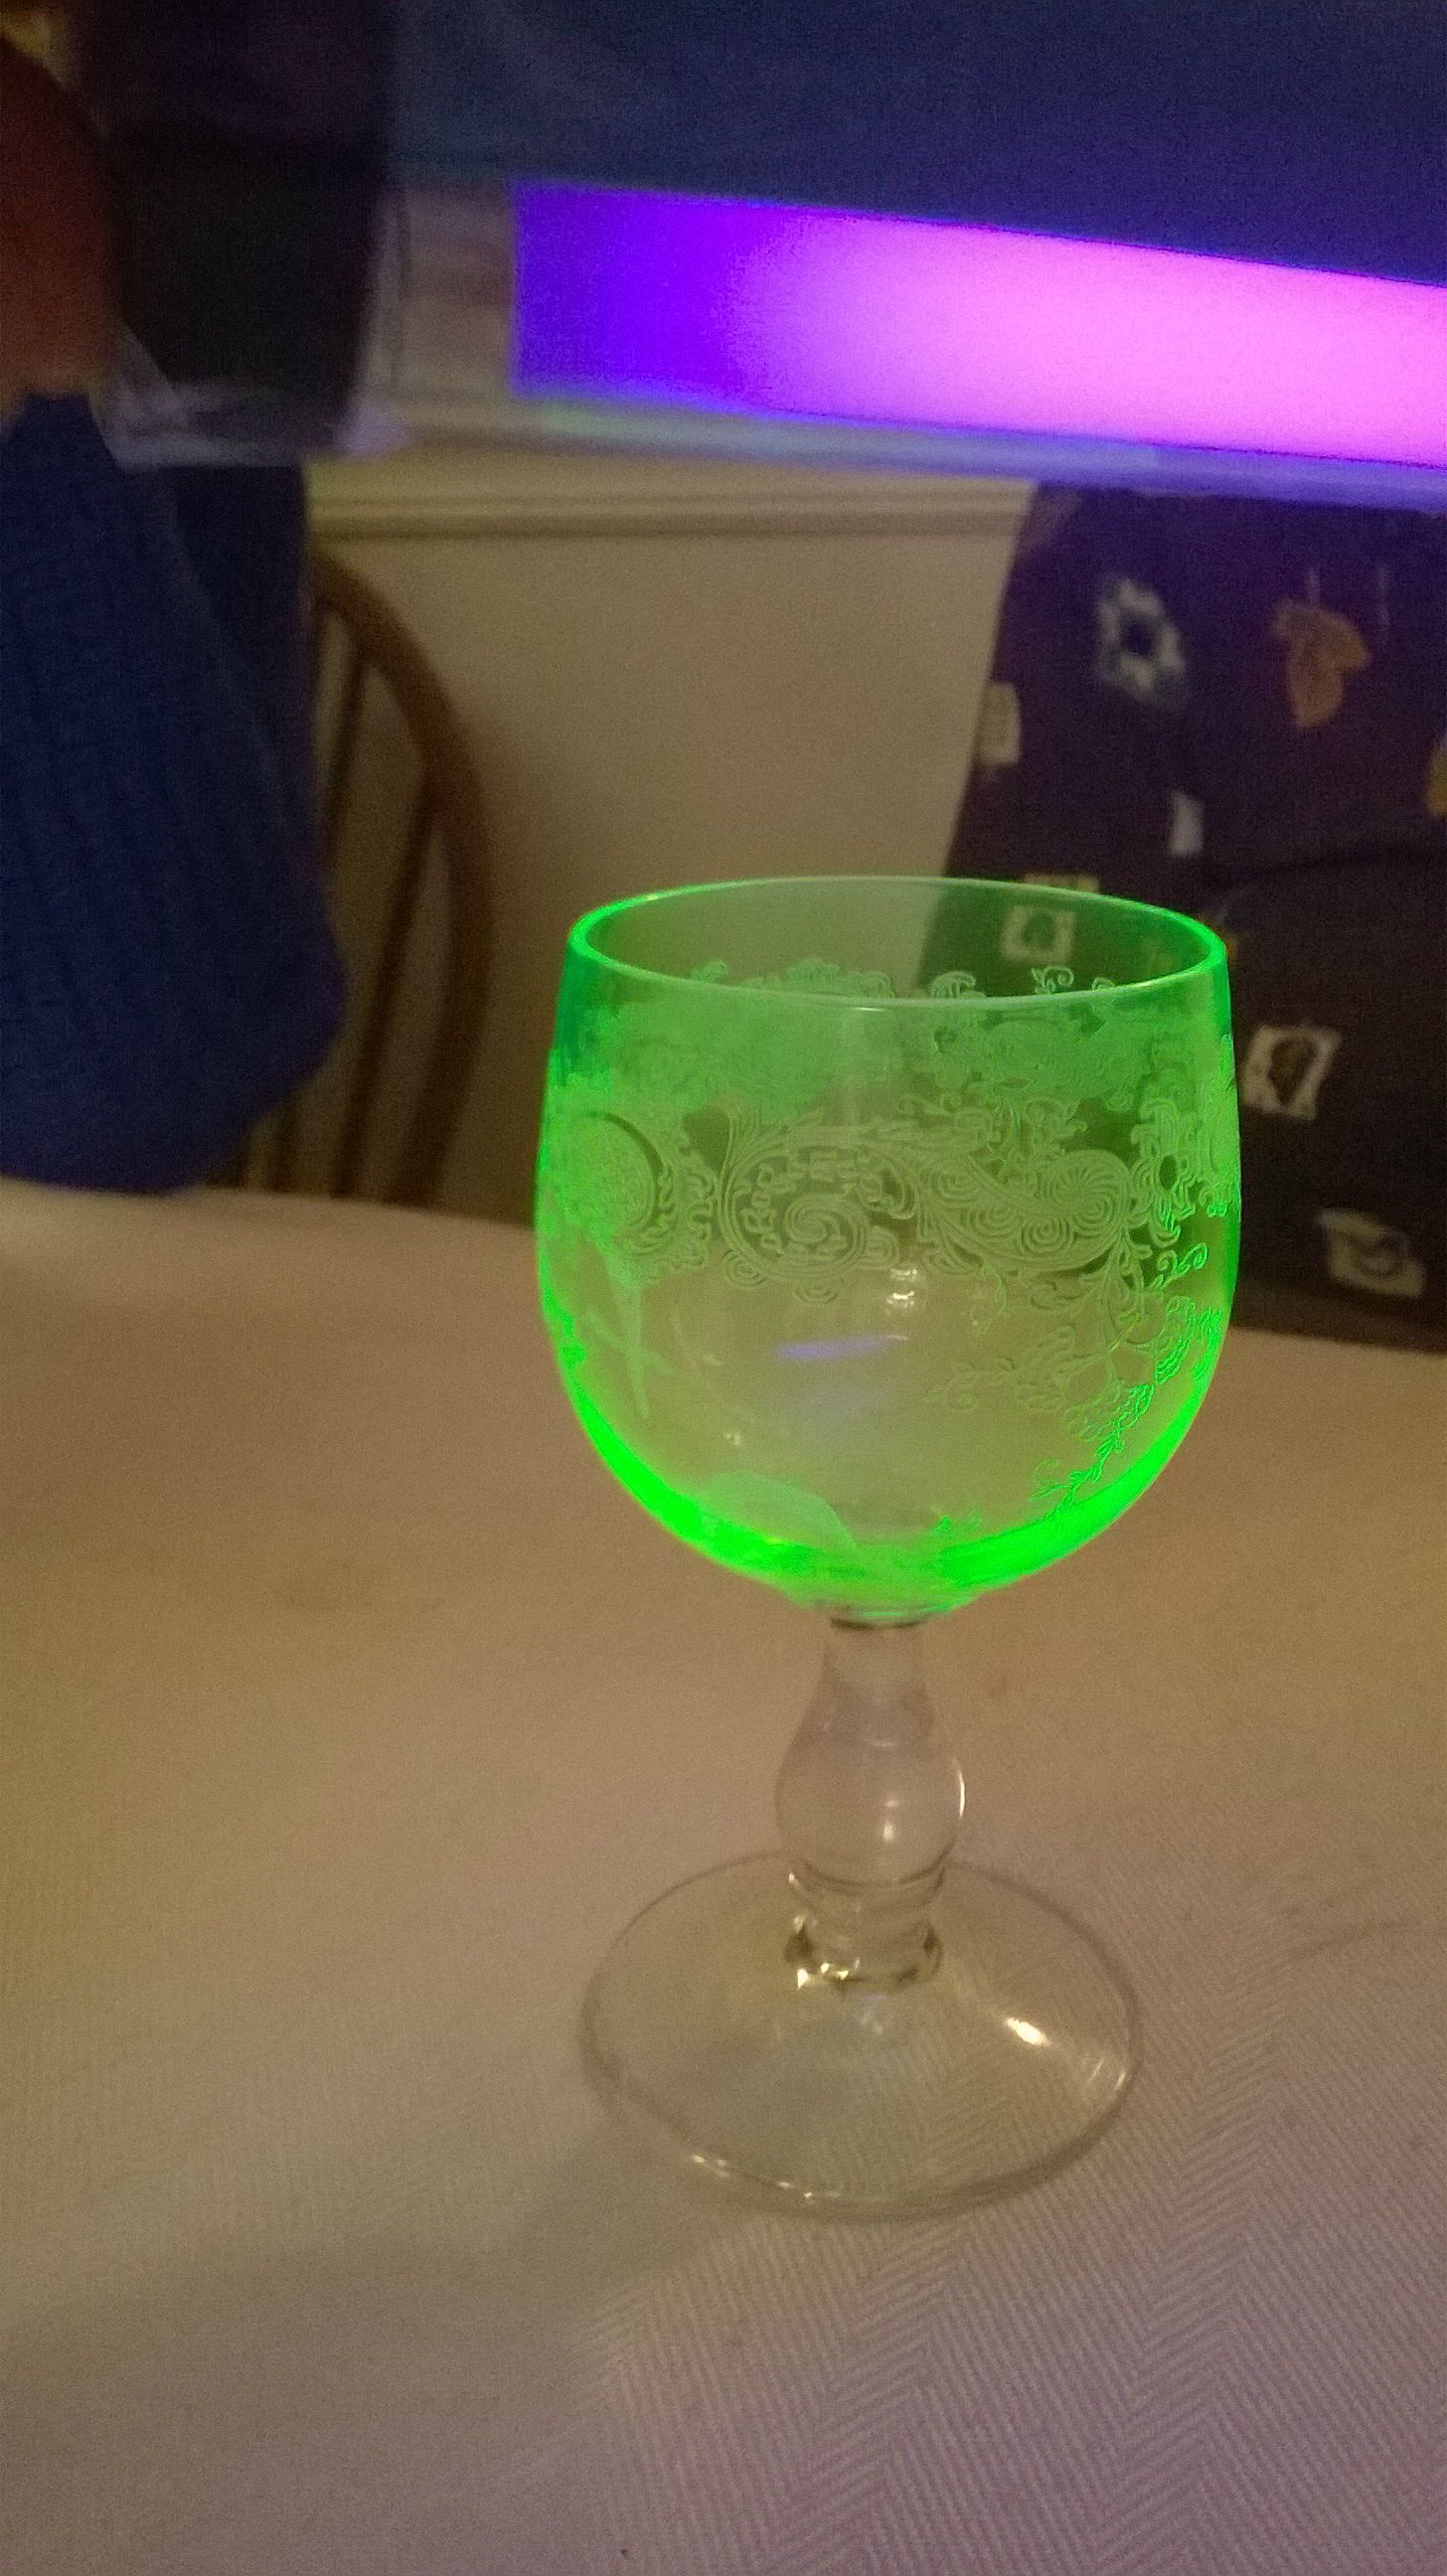 glassware from 1911 that is made with uranium. When exposed to UV light, it glows green